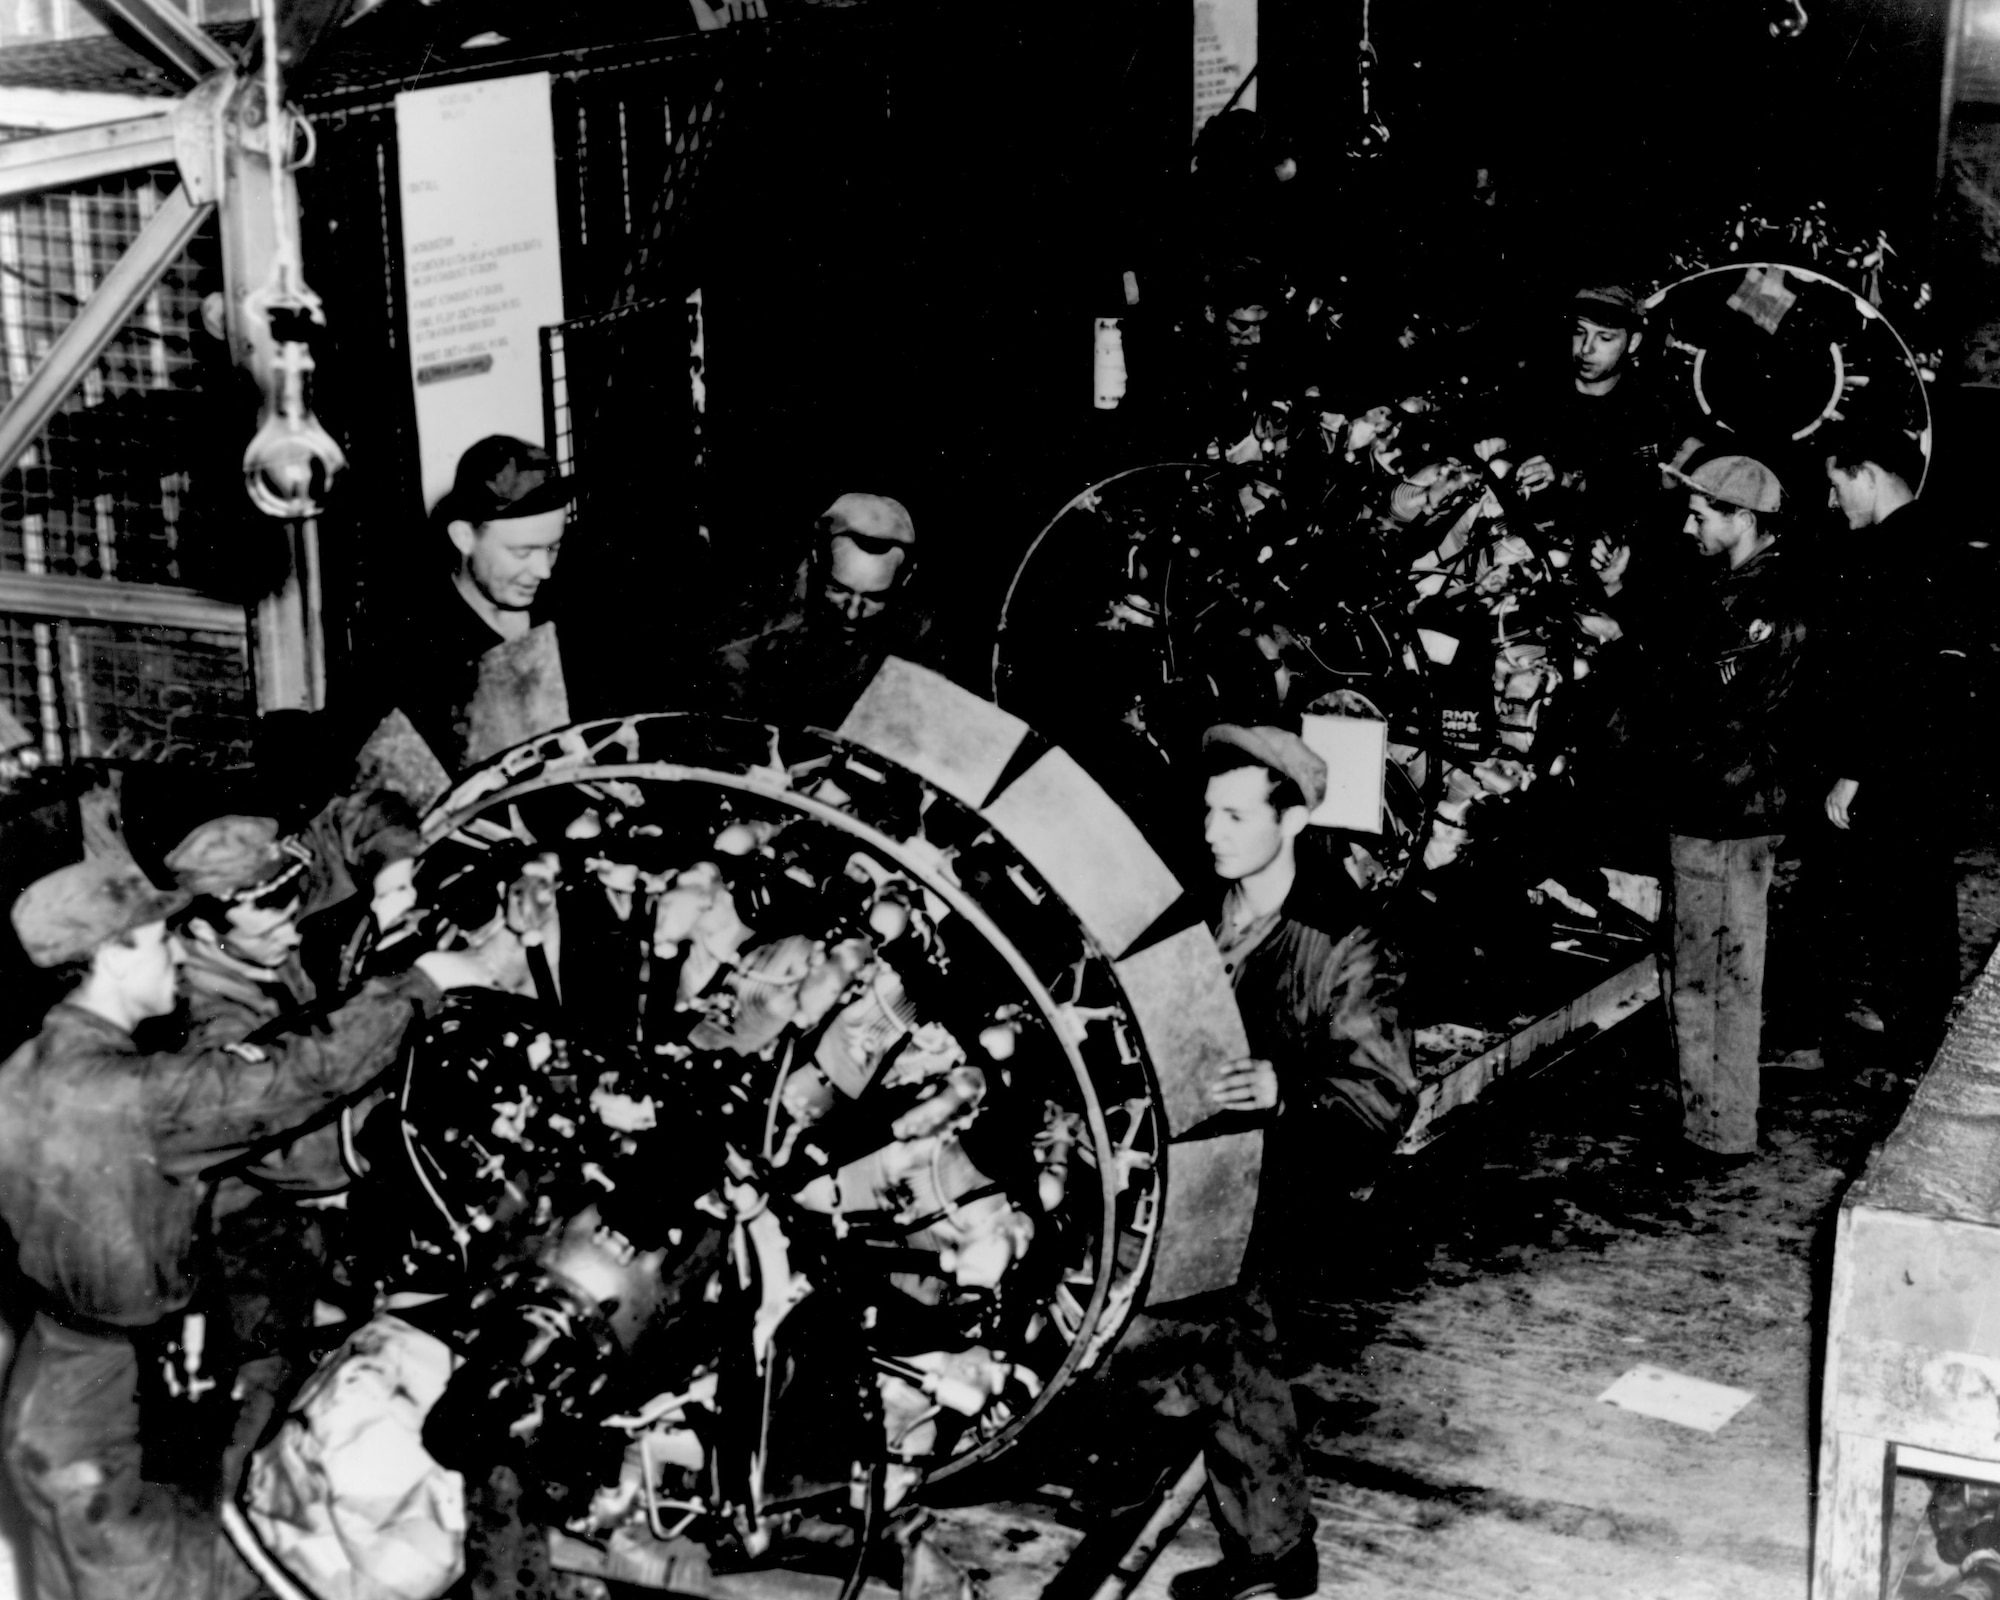 Workers service an engine on the engine buildup line at Rhein Main Air Base, Germany in 1948. Here the engines used on C-54 Skymasters flying the airlift to Berlin were disassembled, checked, worn parts replaced, reassembled and returned to service on the aircraft. (Courtesy photo)